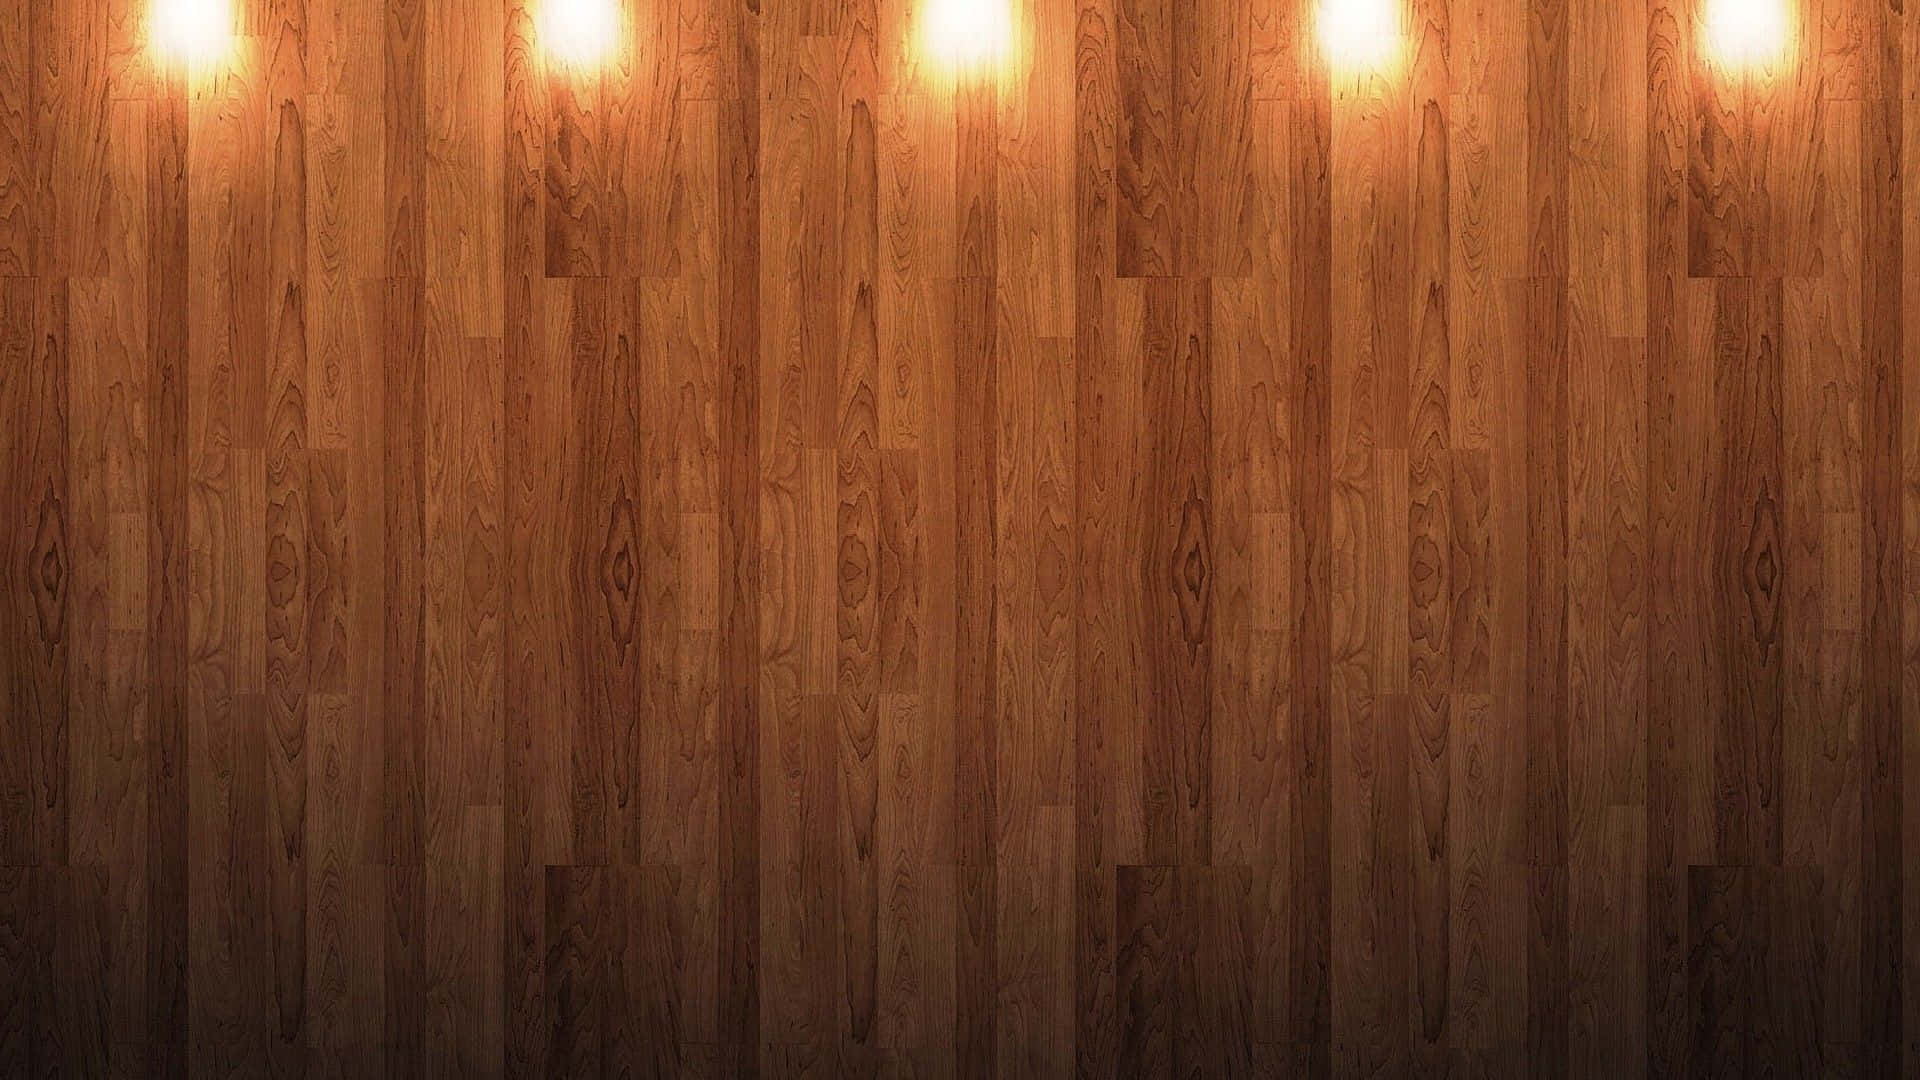 Wood With Spotlights Background